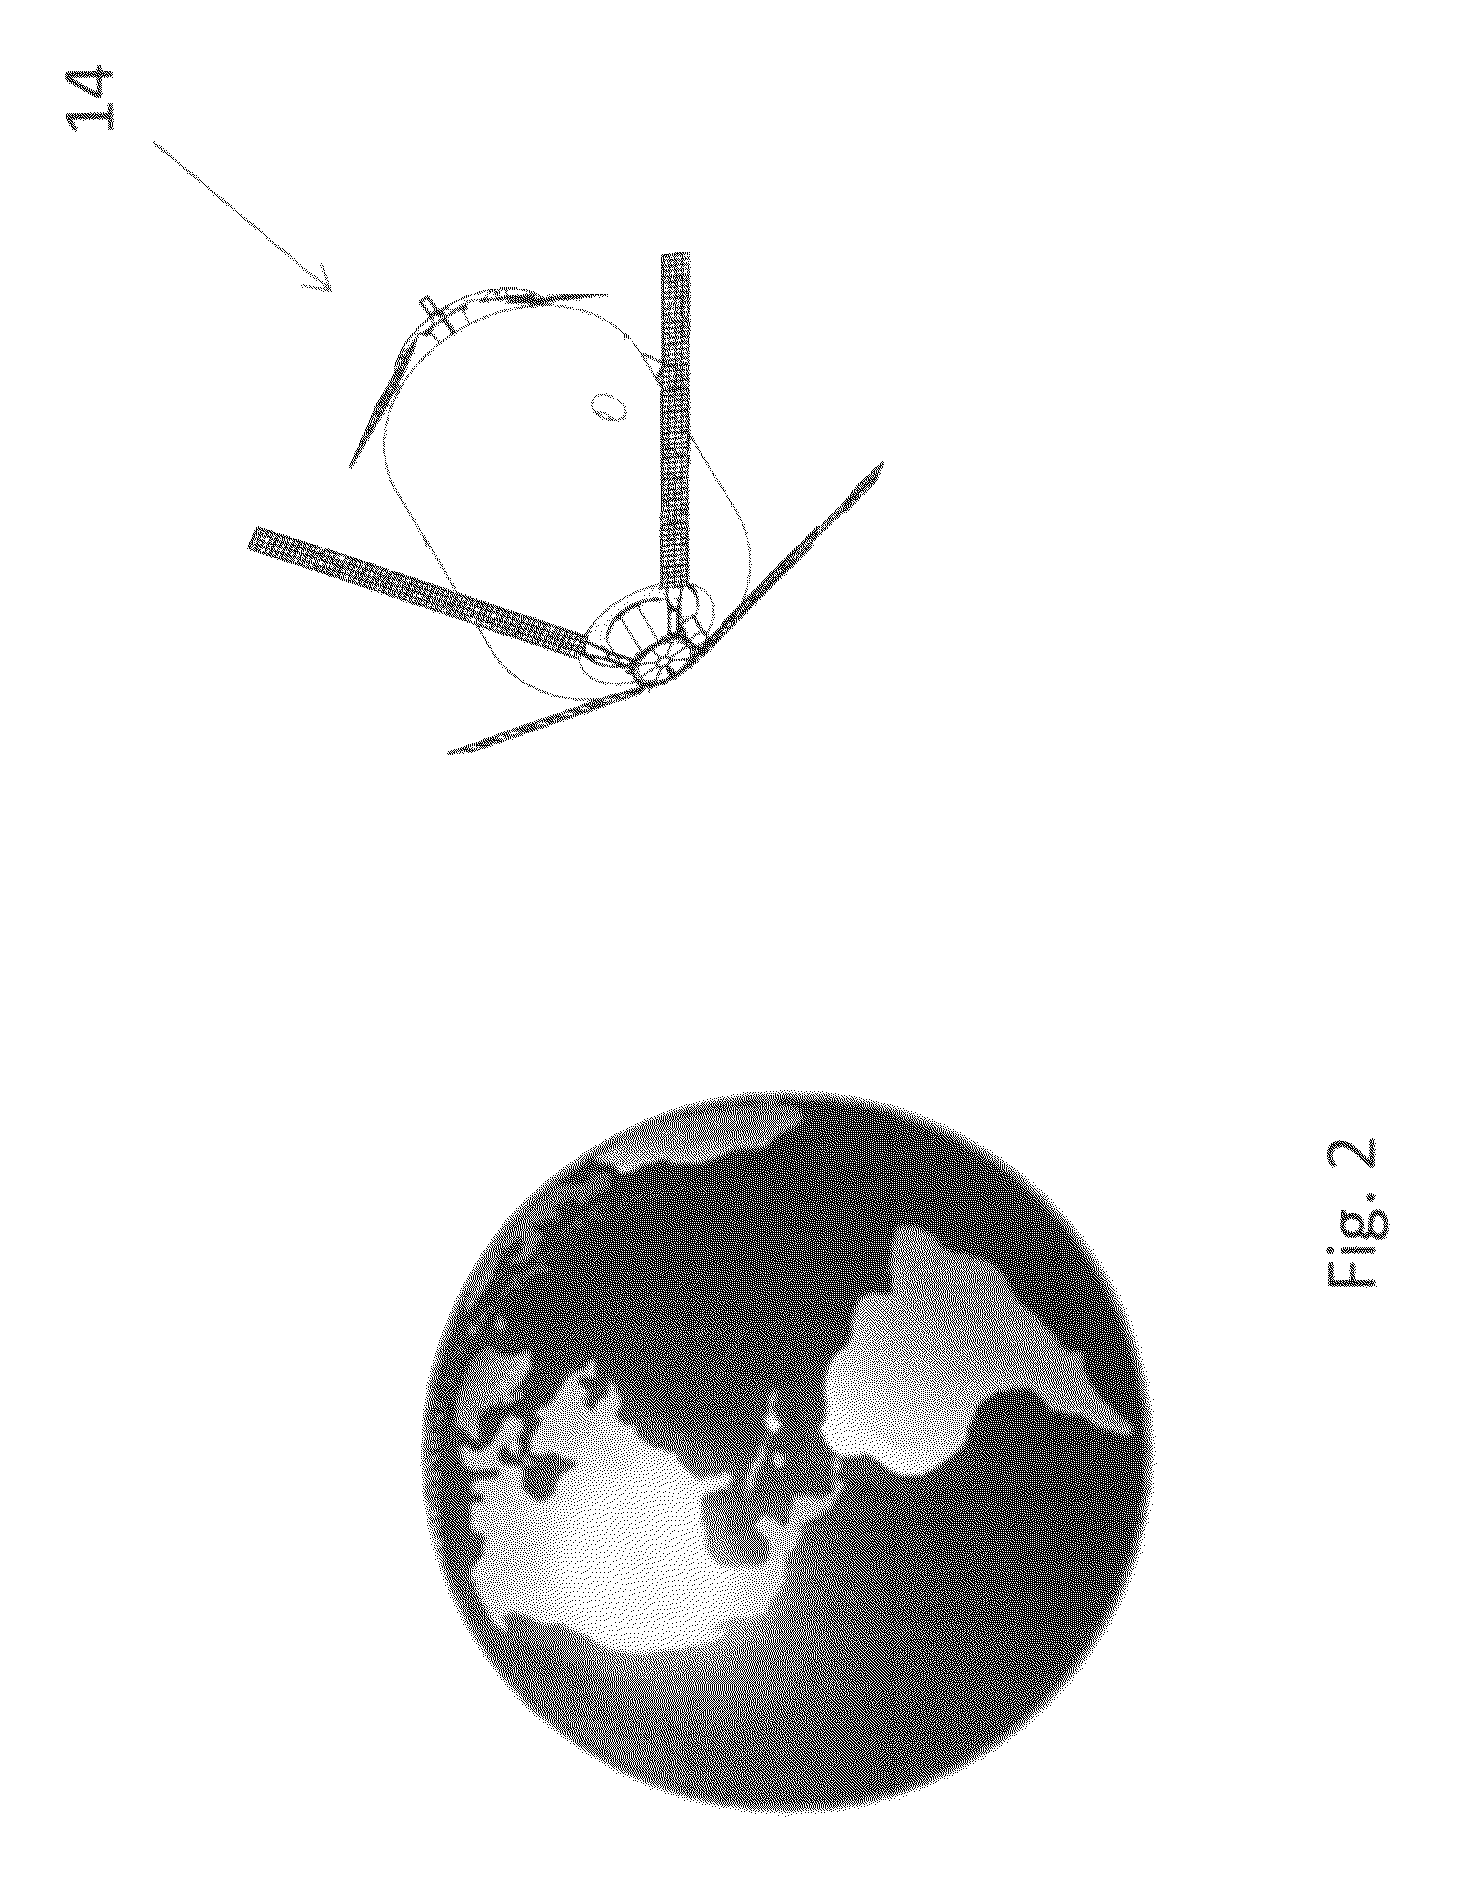 Method of deploying a spacecraft shield in space